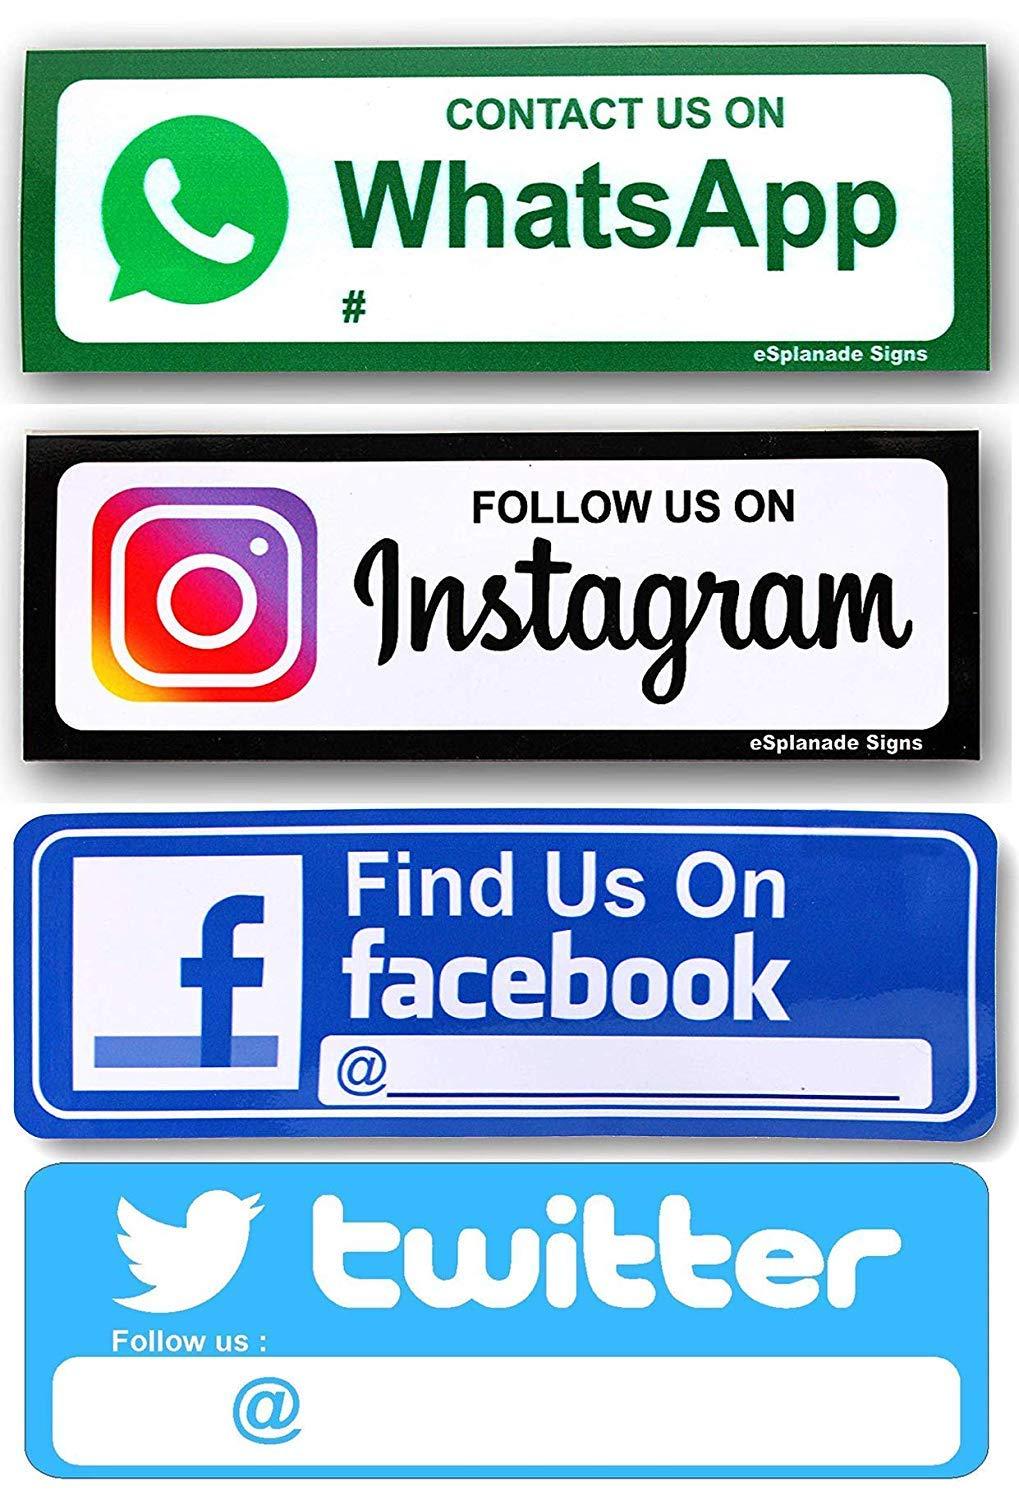 Come stampare il Green Pass cartaceo rotate-mobile Facebook Twitter WhatsApp Facebook Twitter WhatsApp Email Facebook Twitter WhatsApp Facebook Twitter WhatsApp Email 